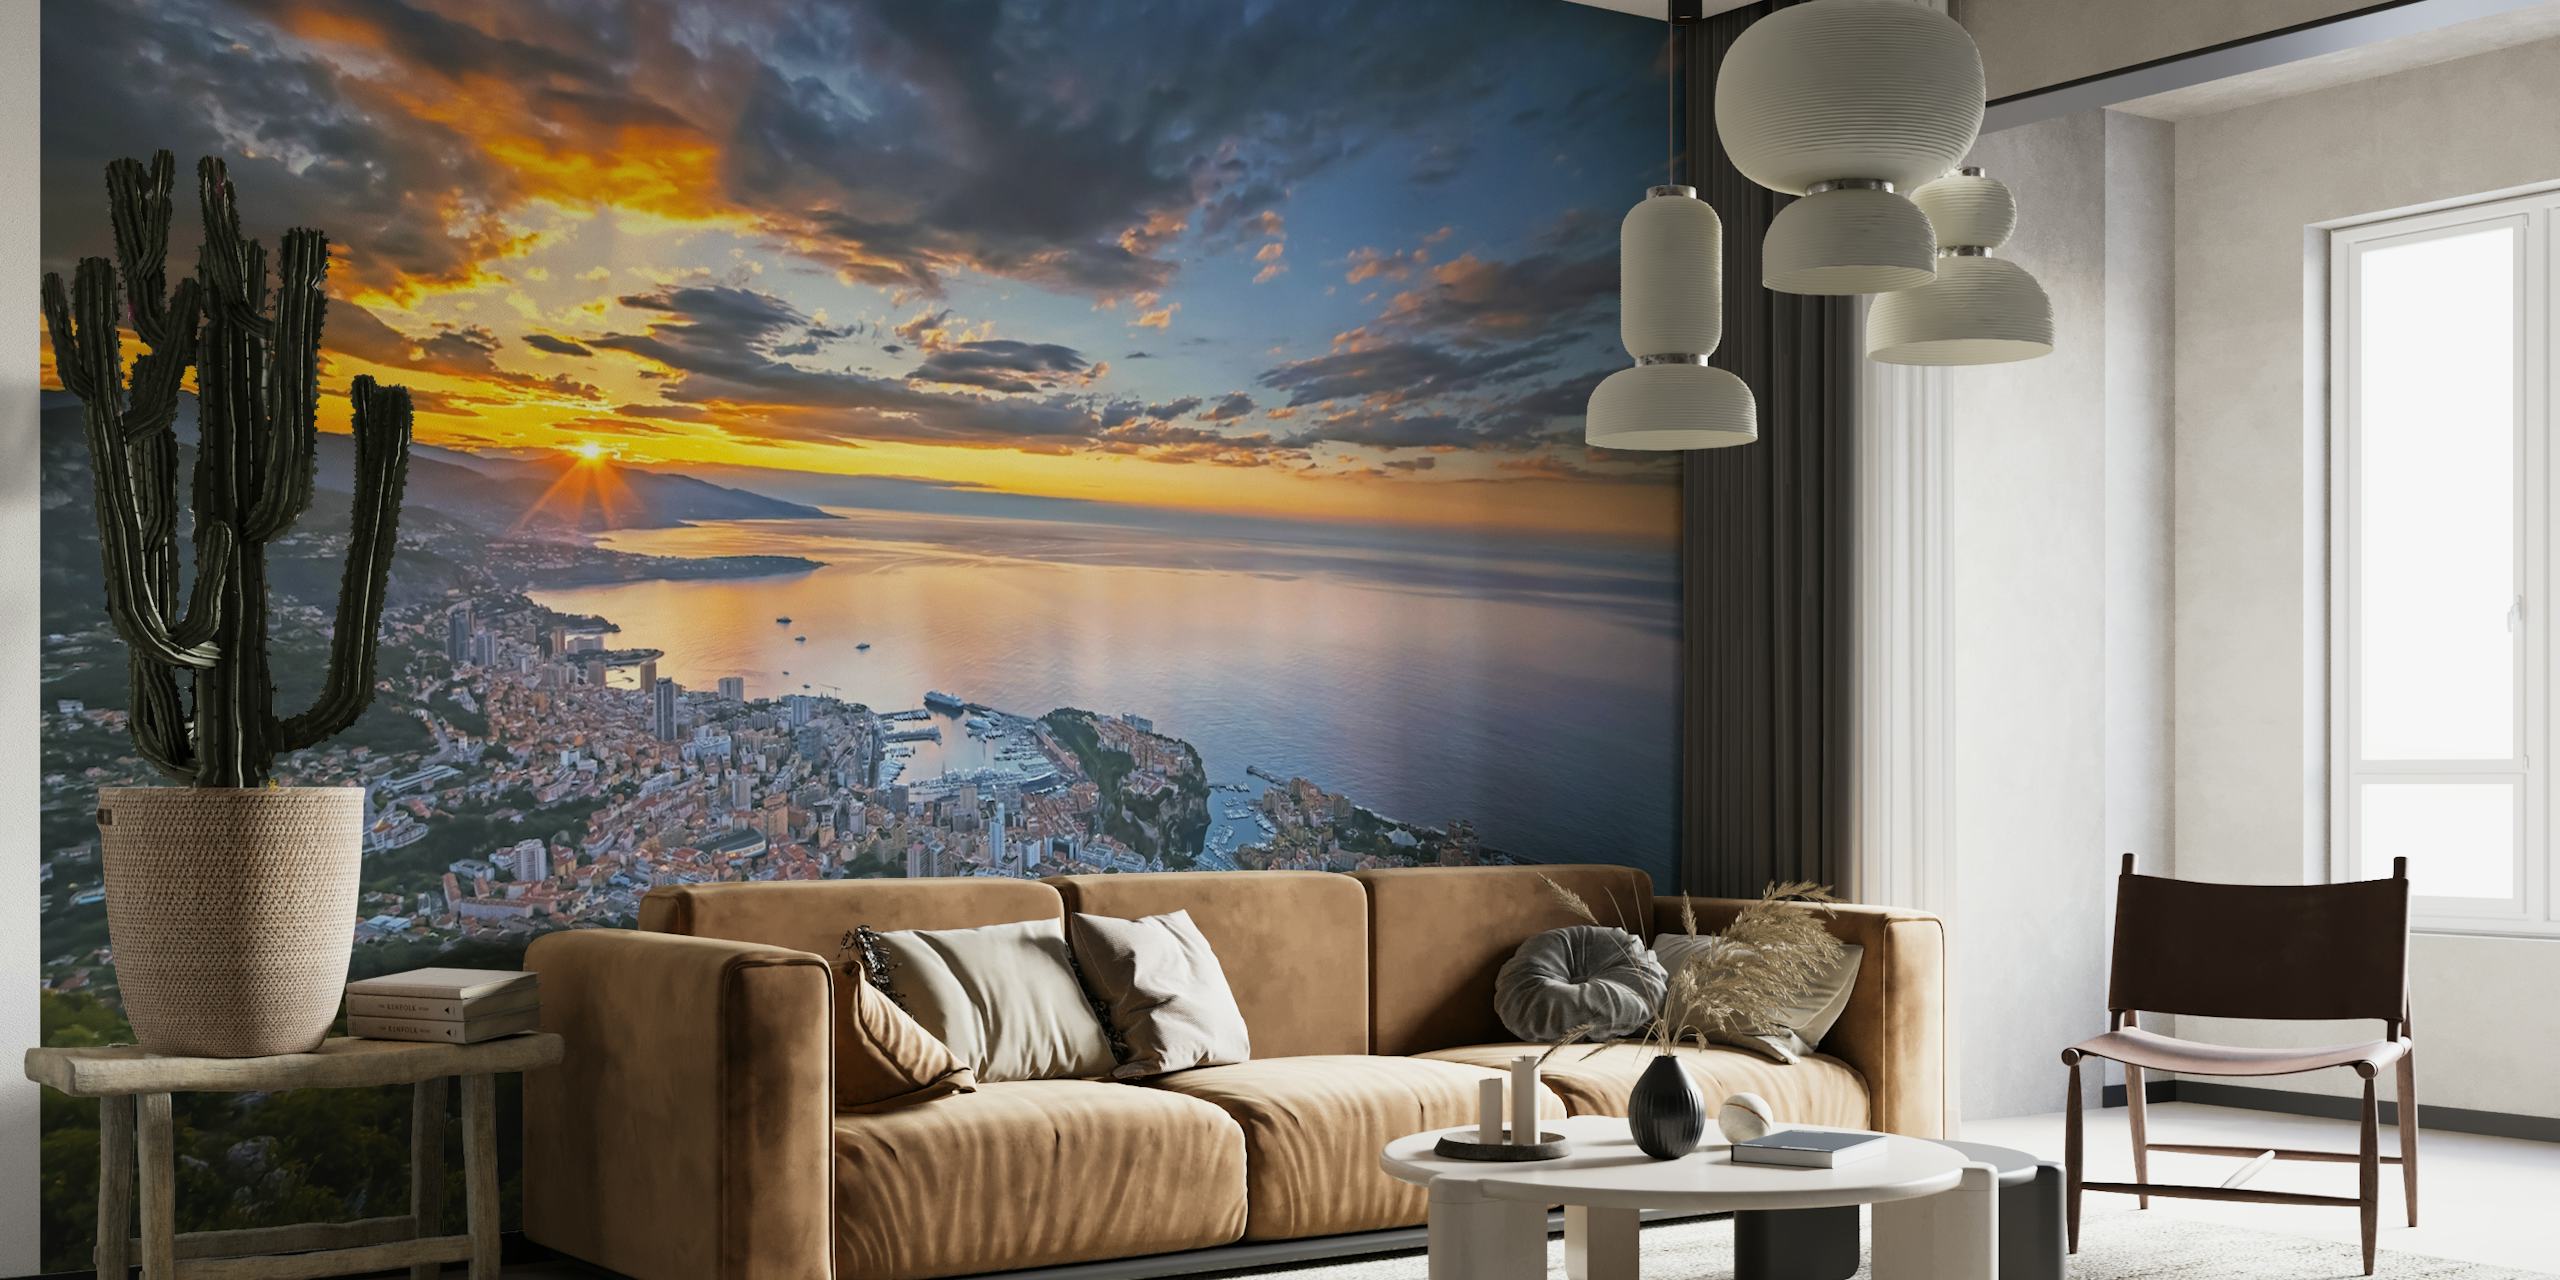 Sunrise over Monaco cityscape wall mural with ocean view